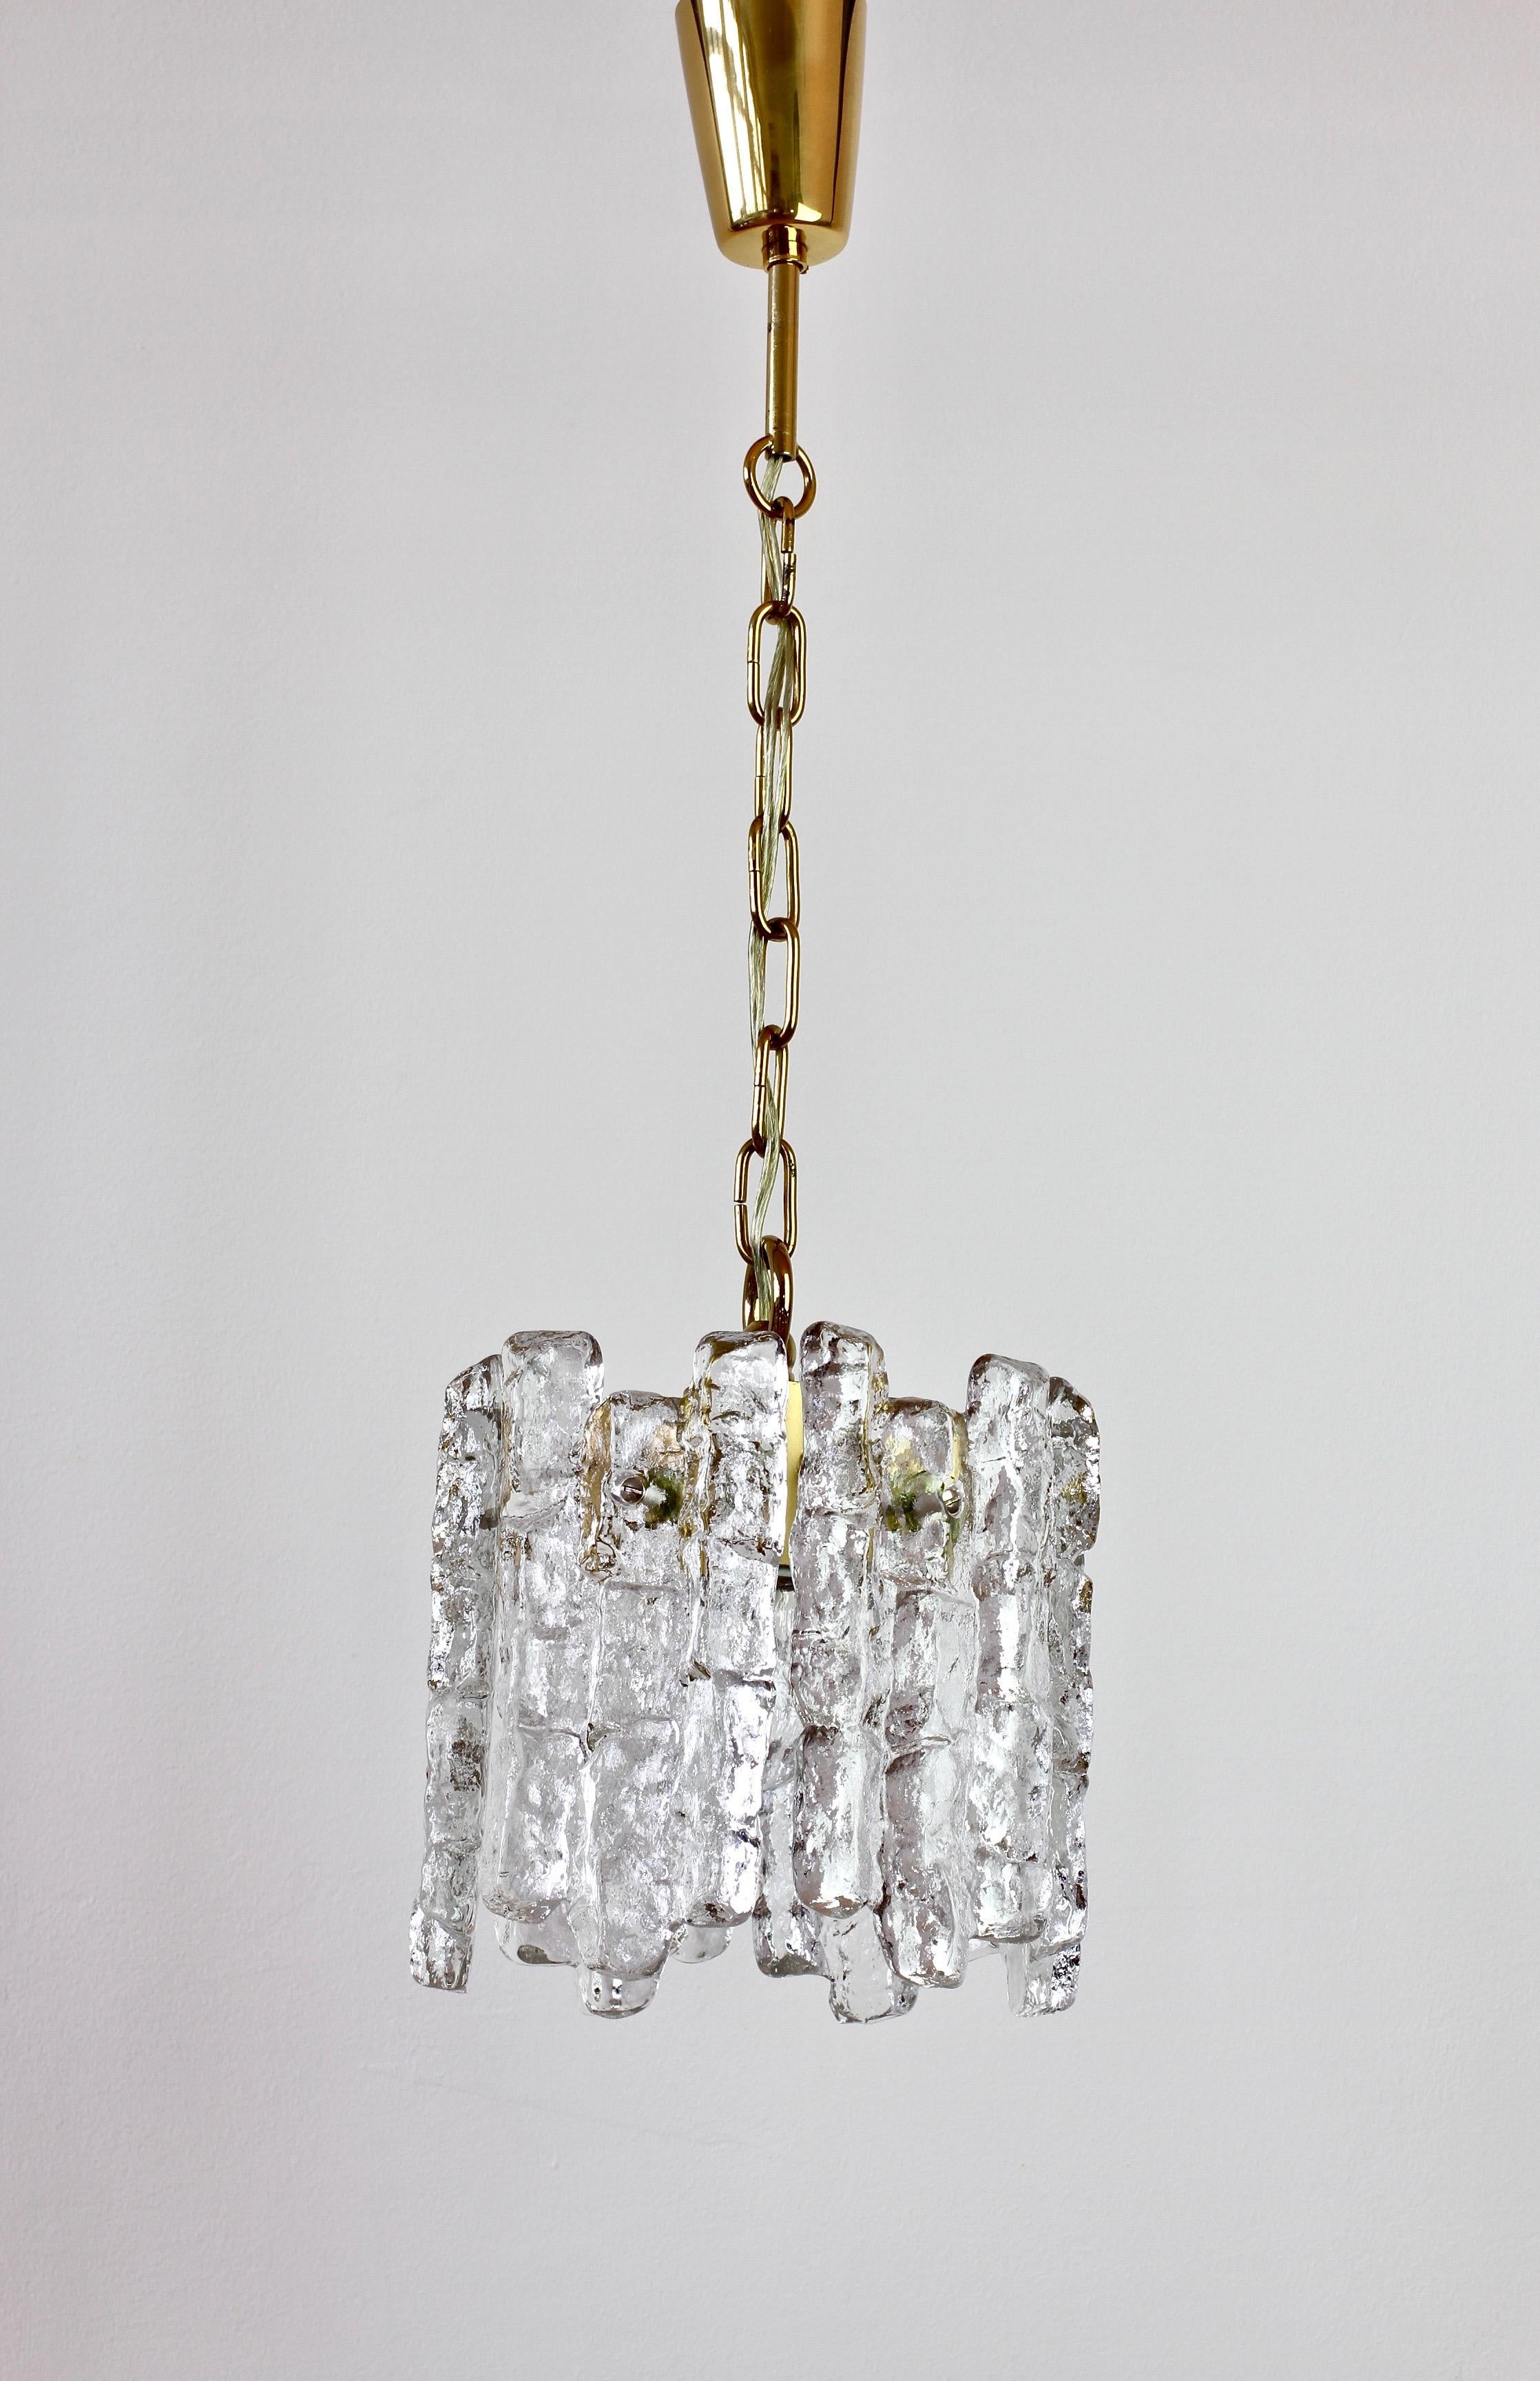 Molded Mid-Century Kalmar Ice Crystal Glass and Brass Pendant Light or Chandelier 1960s For Sale